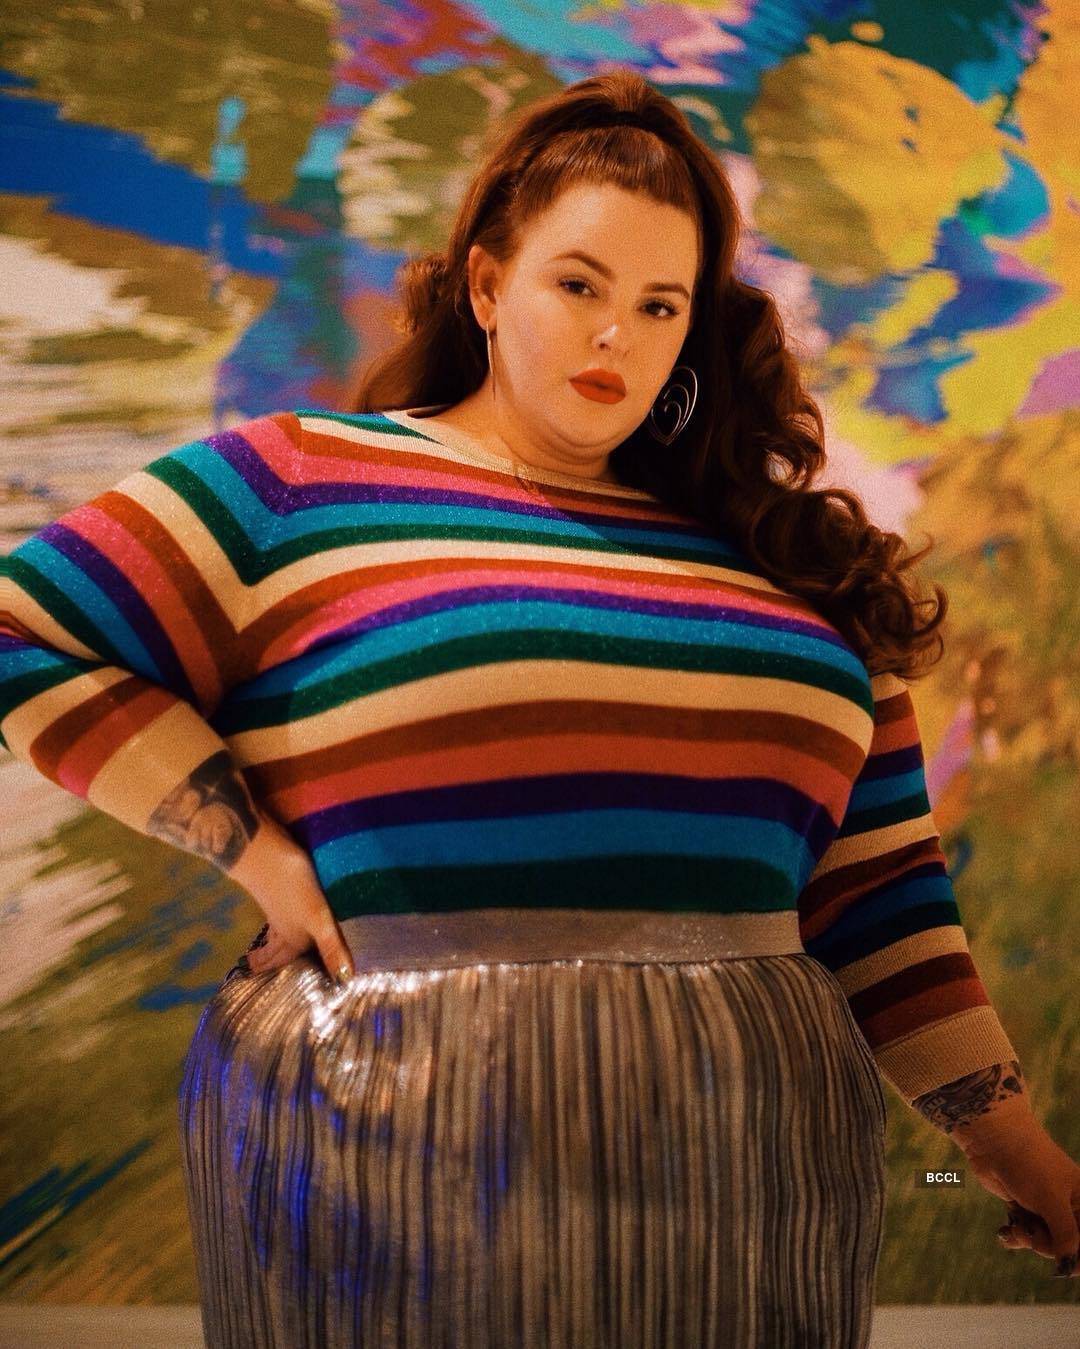 7 Excellent Plus-Size Fashion Brands, According to Tess Holliday